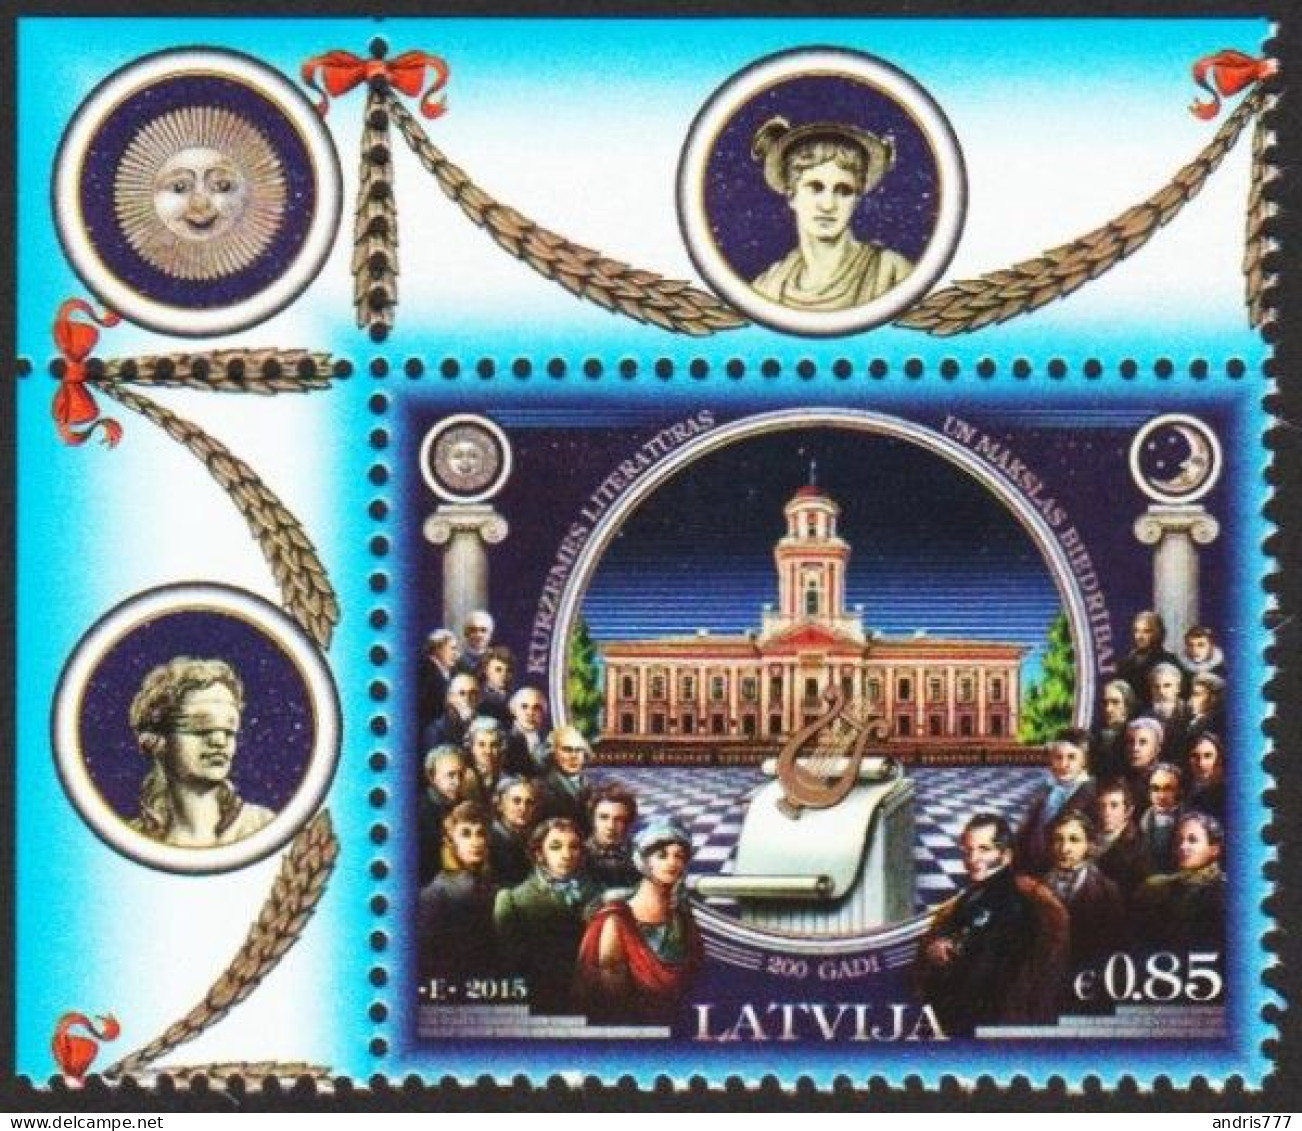 Latvia Lettland Lettonie 2015 (09) Courland Society For Literature And Art - 200 Years (corner) - Lettland